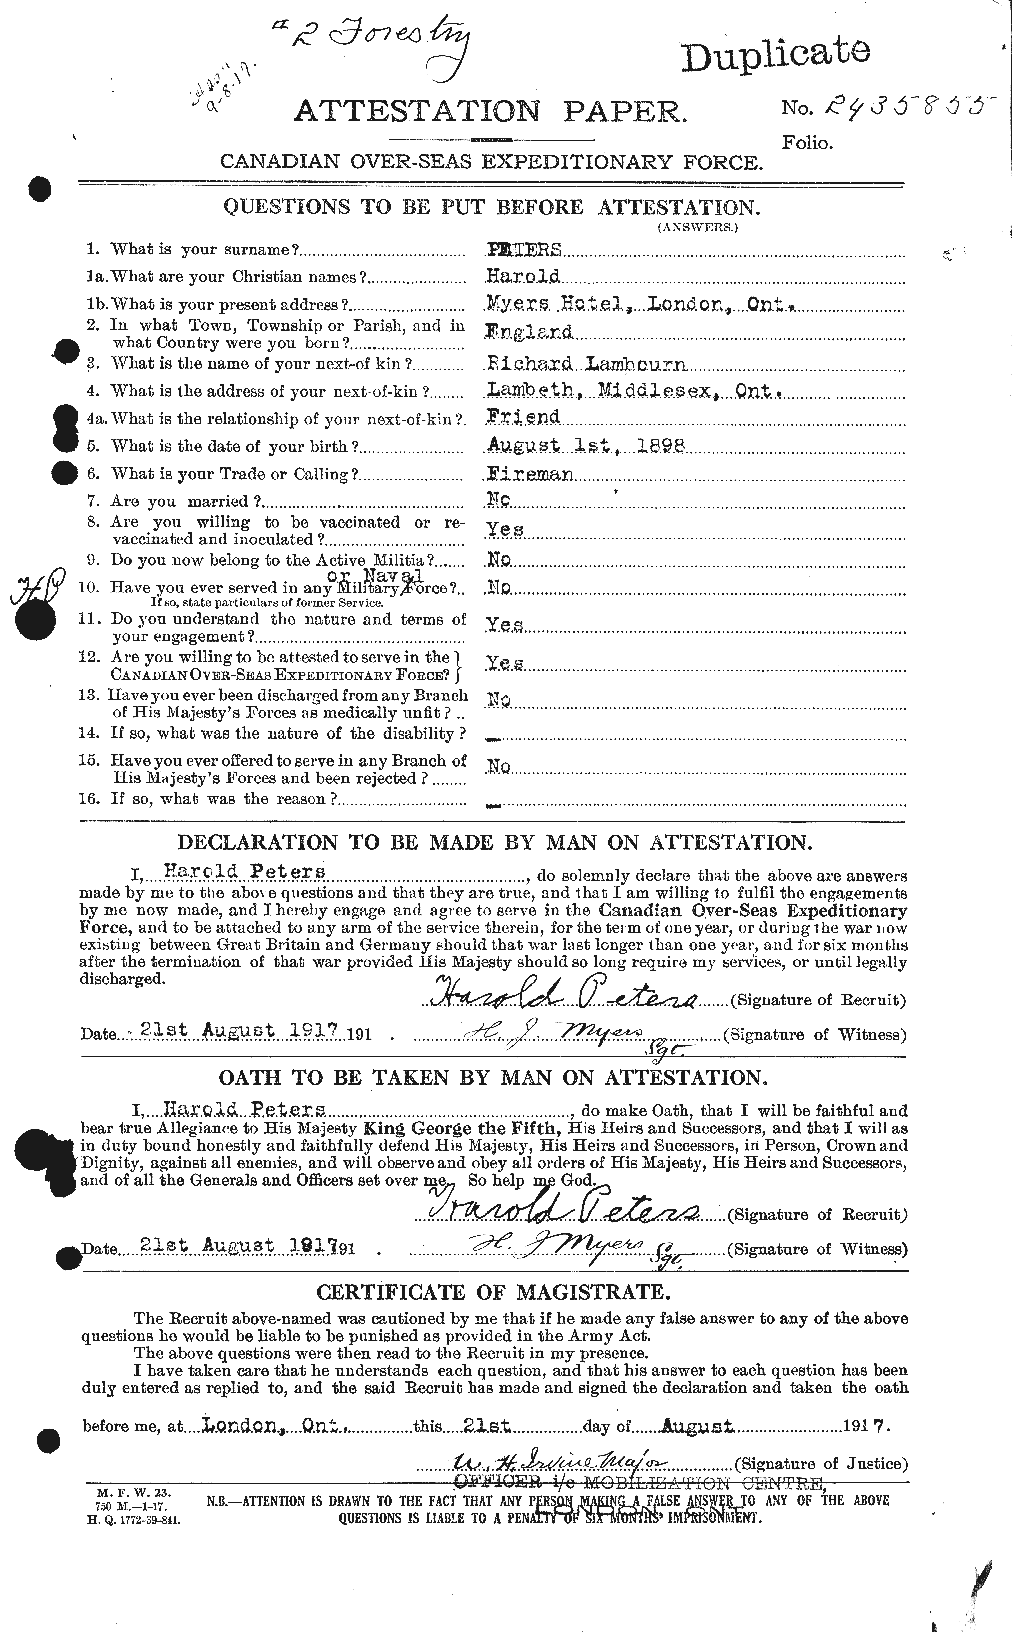 Personnel Records of the First World War - CEF 575474a